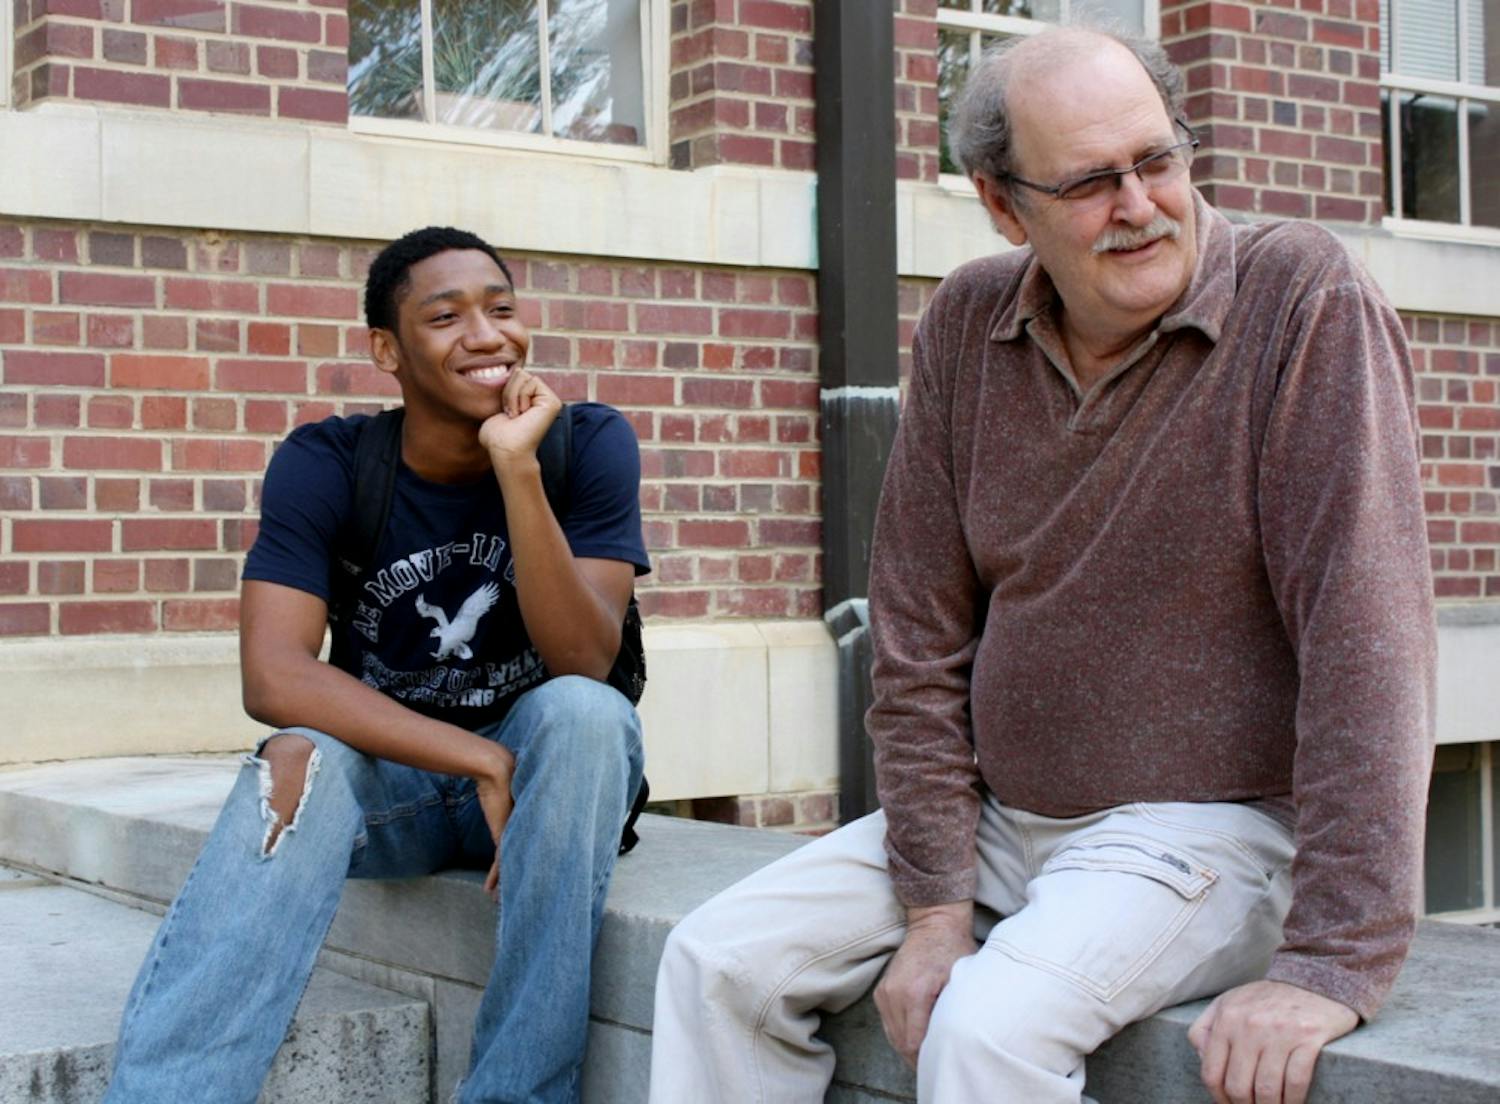 Ralph Byrns and his student Kahlil Blount, a sophomore political science and economics double major, talk outside Gardner Hall about class and starting an undergraduate economic research club. Blount said Byrns is “the best person in the economics department.”